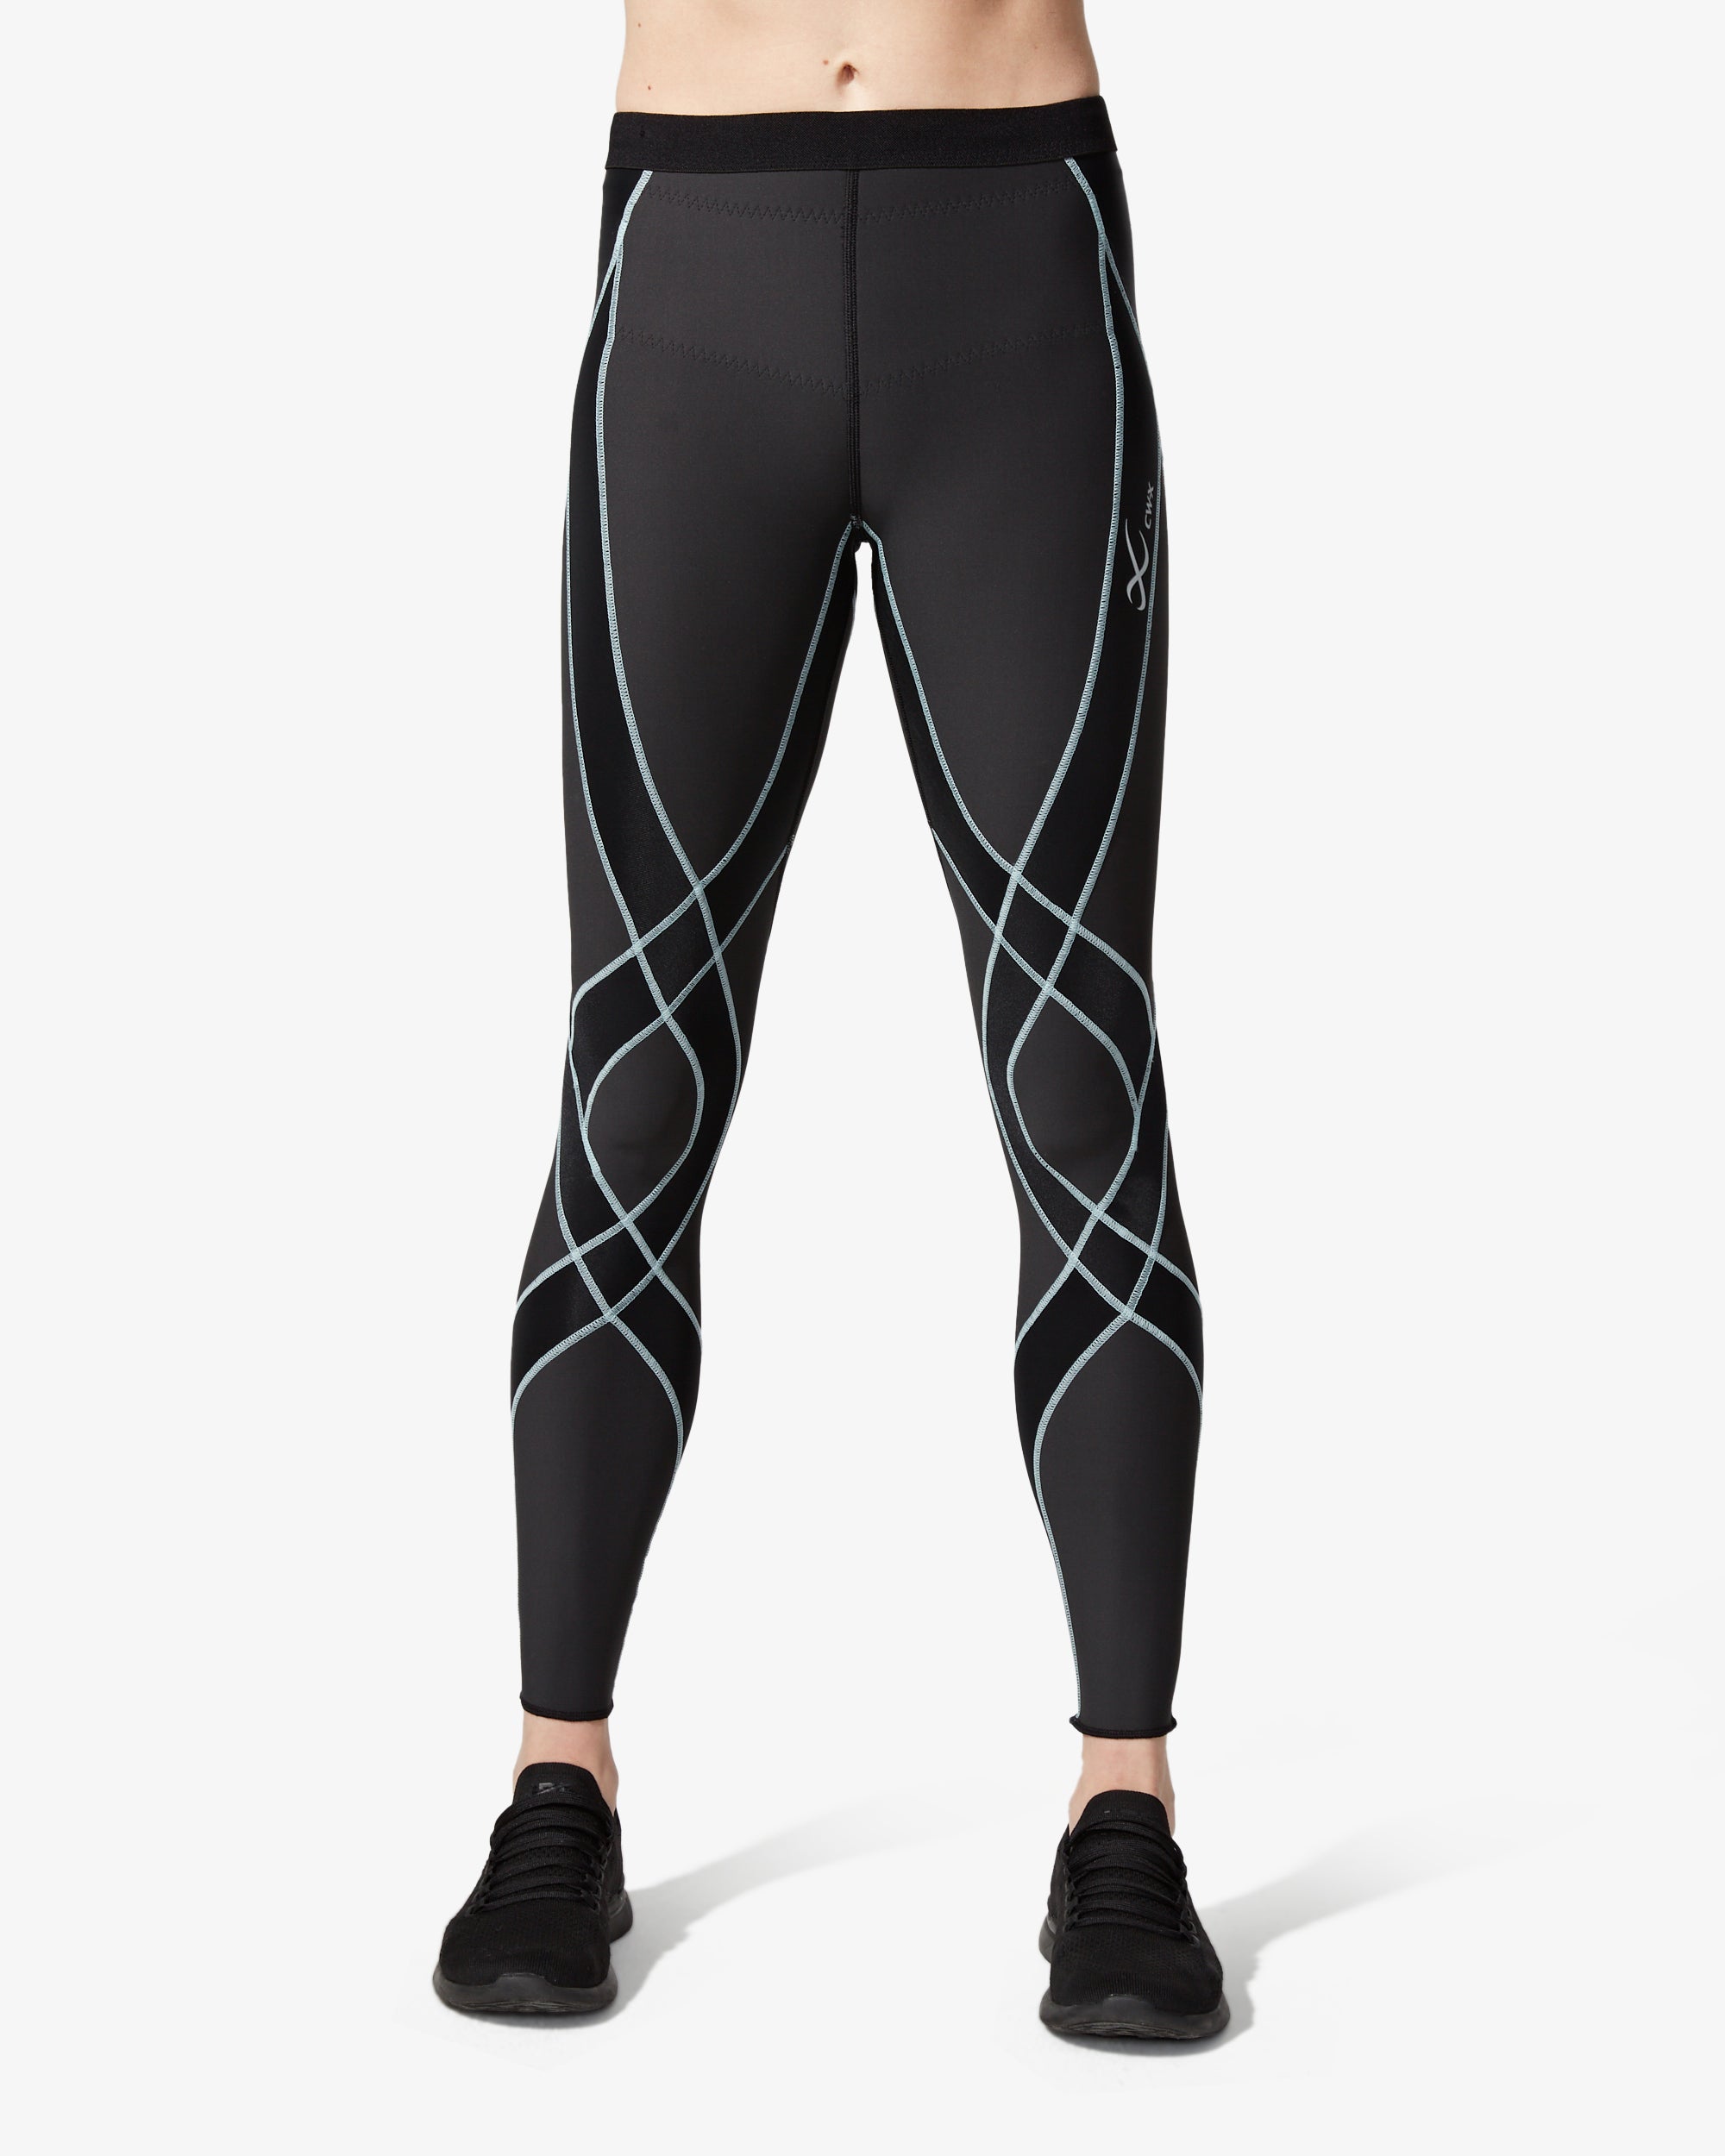 CHUM 104.5 on X: These leggings just debuted at #CES in Vegas! Wear them  when you're moving and you'll receive a shock of static electricity to your  muscles Okay, phew! Totally thought